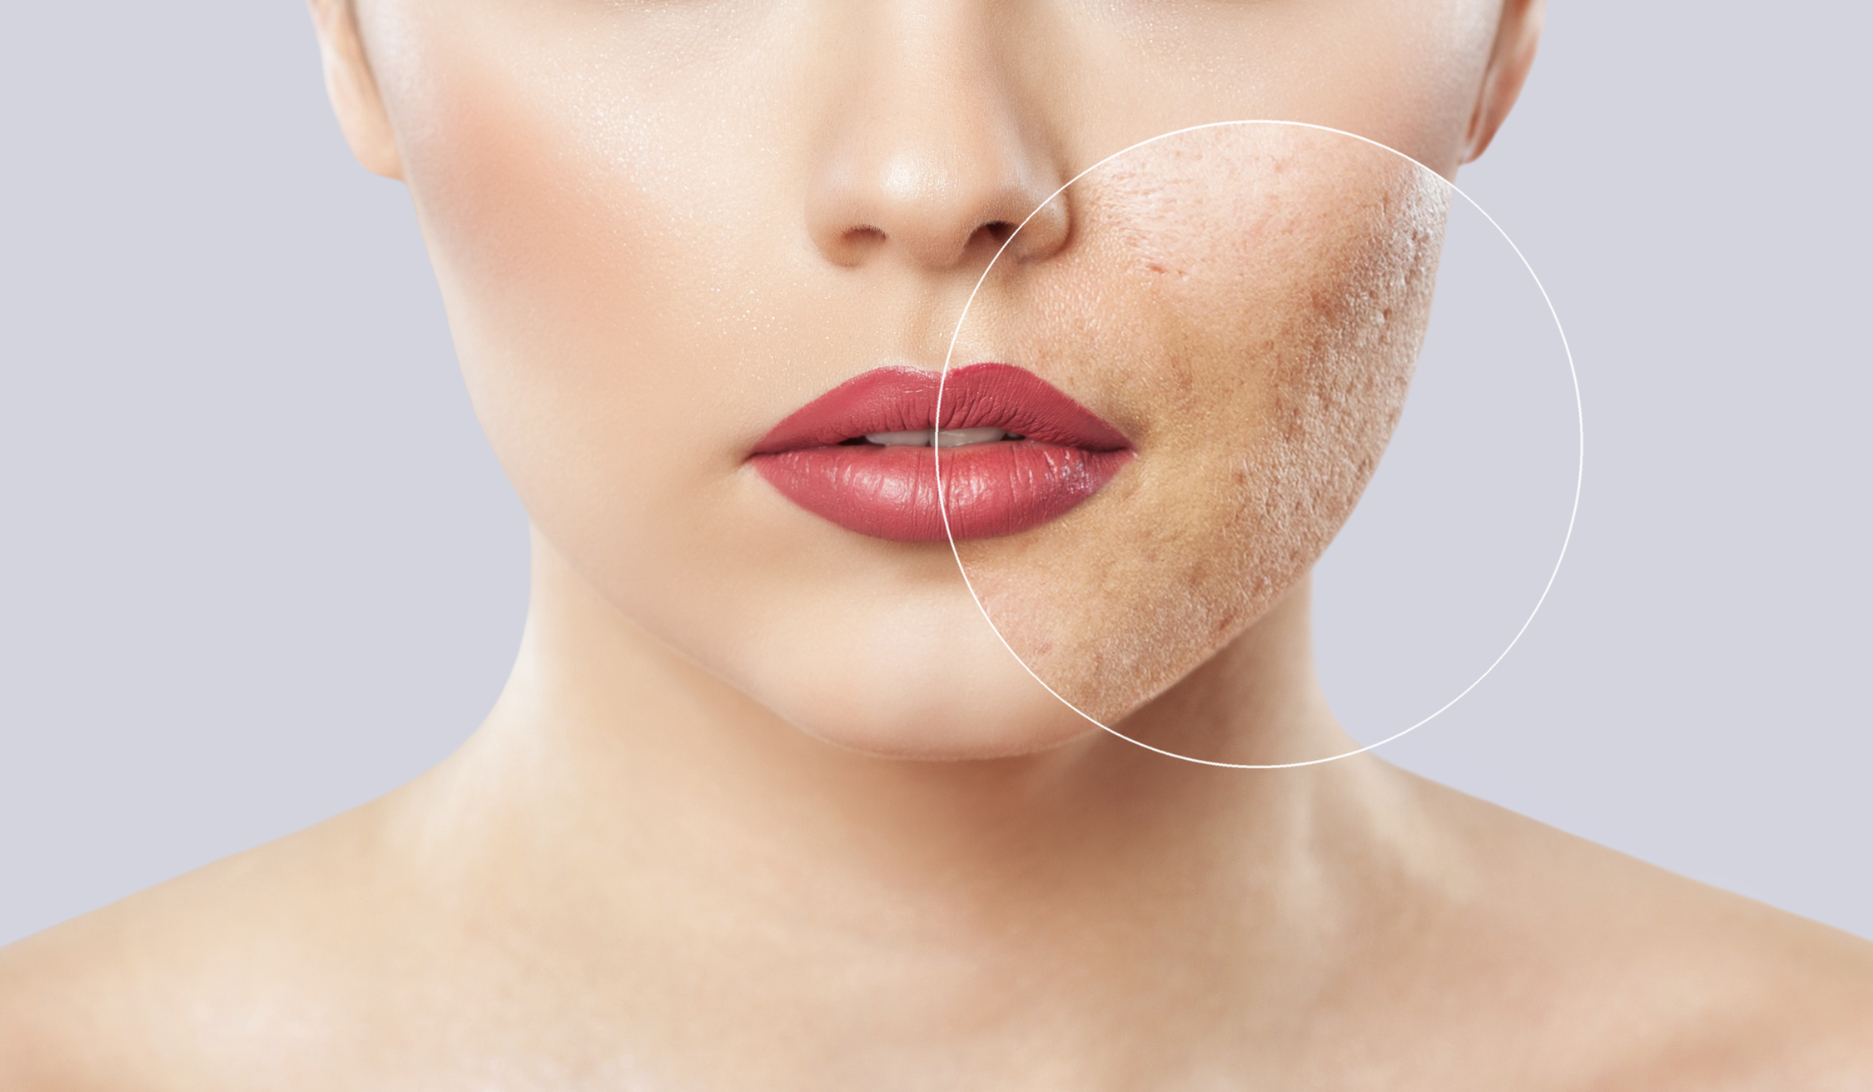 Acne, Marks and Scarring